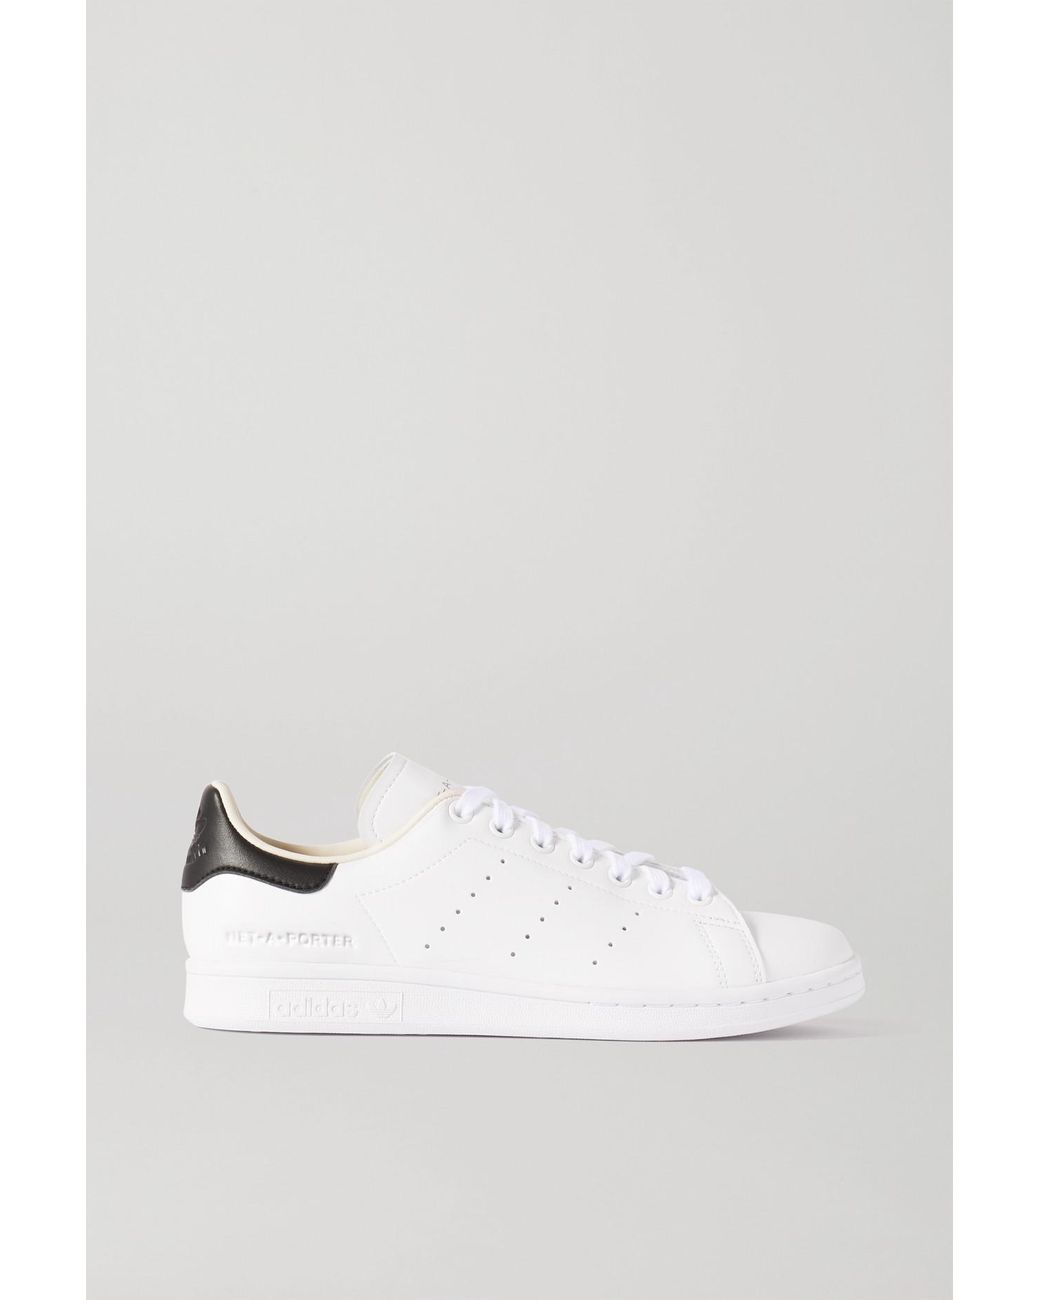 adidas Originals + Net-a-porter Stan Smith Vegan Leather Sneakers in White  | Lyst Canada